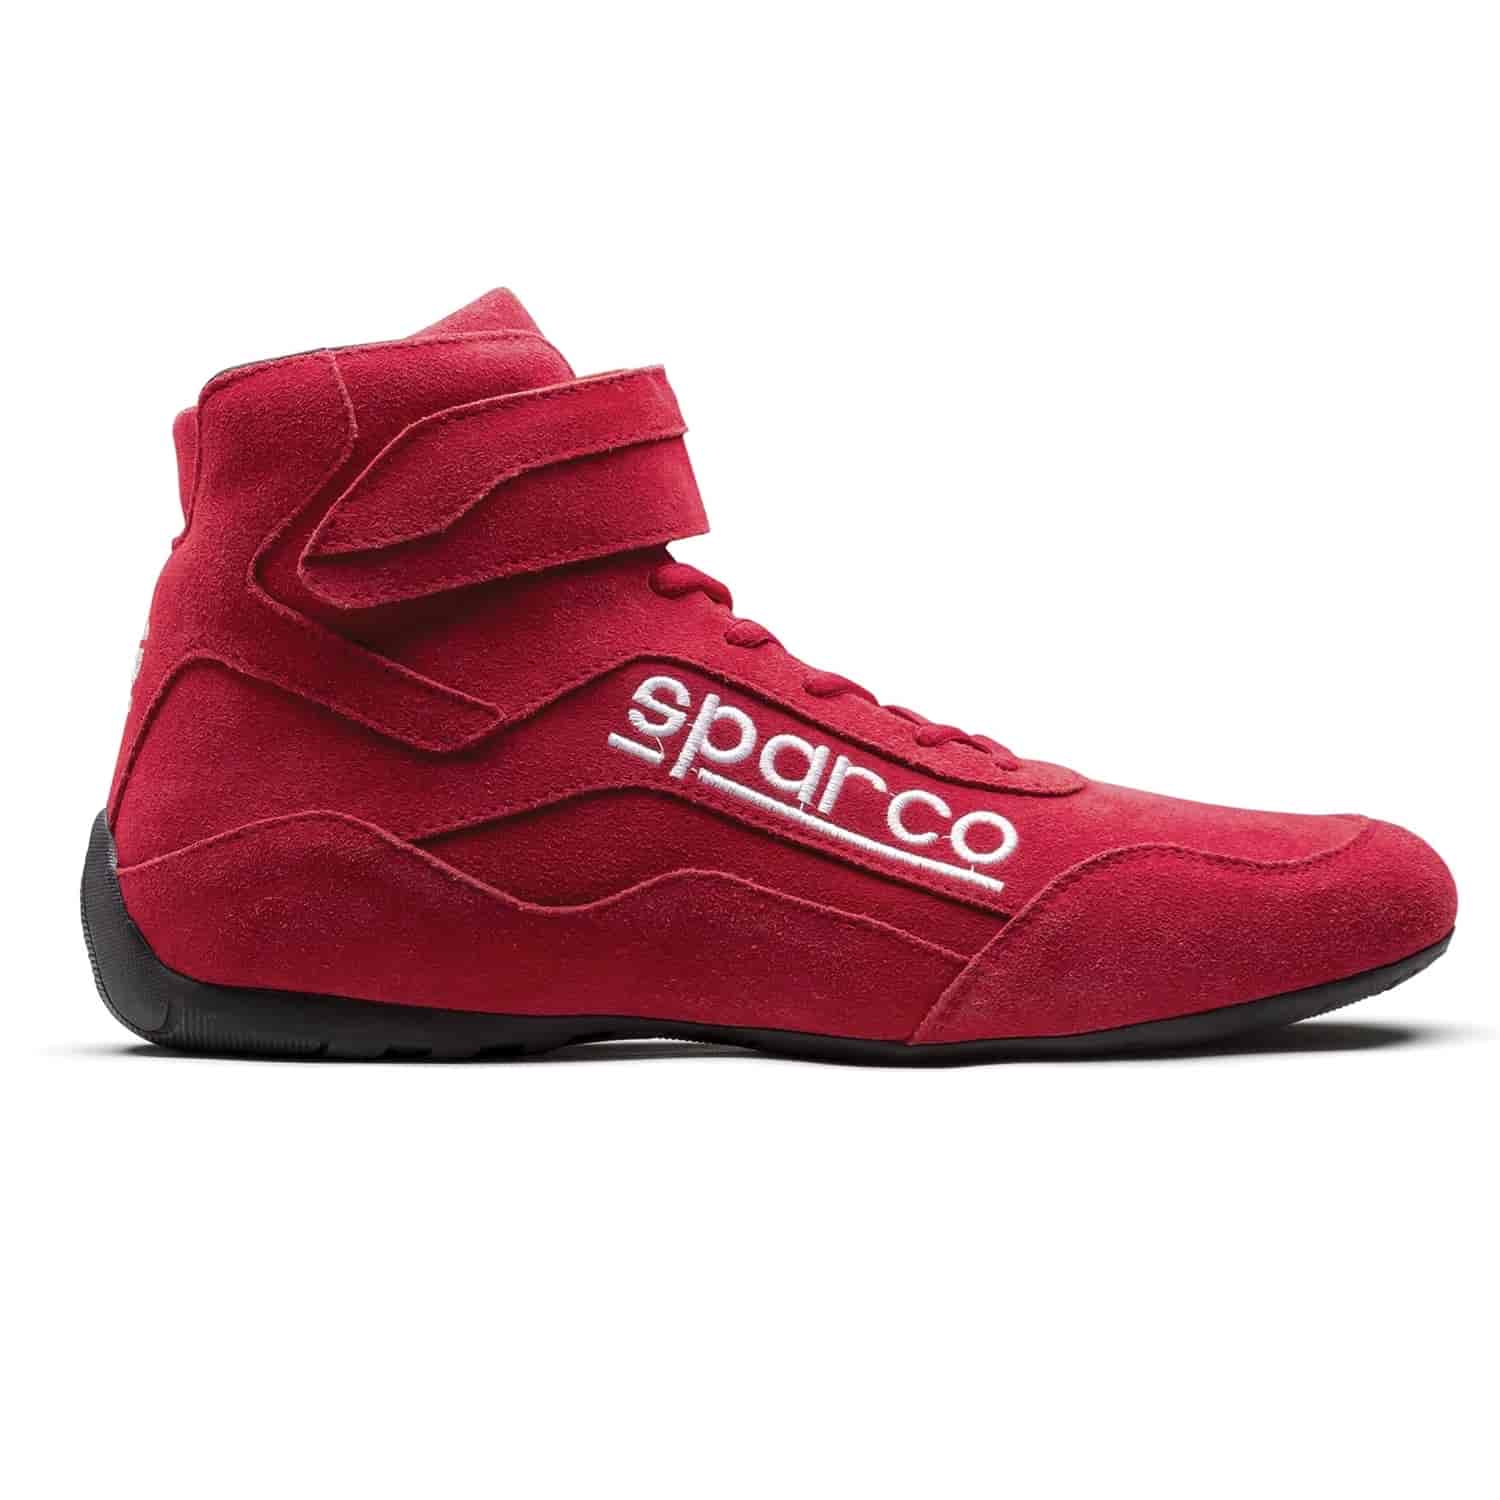 Race 2 Shoe Size 12.5 - Red